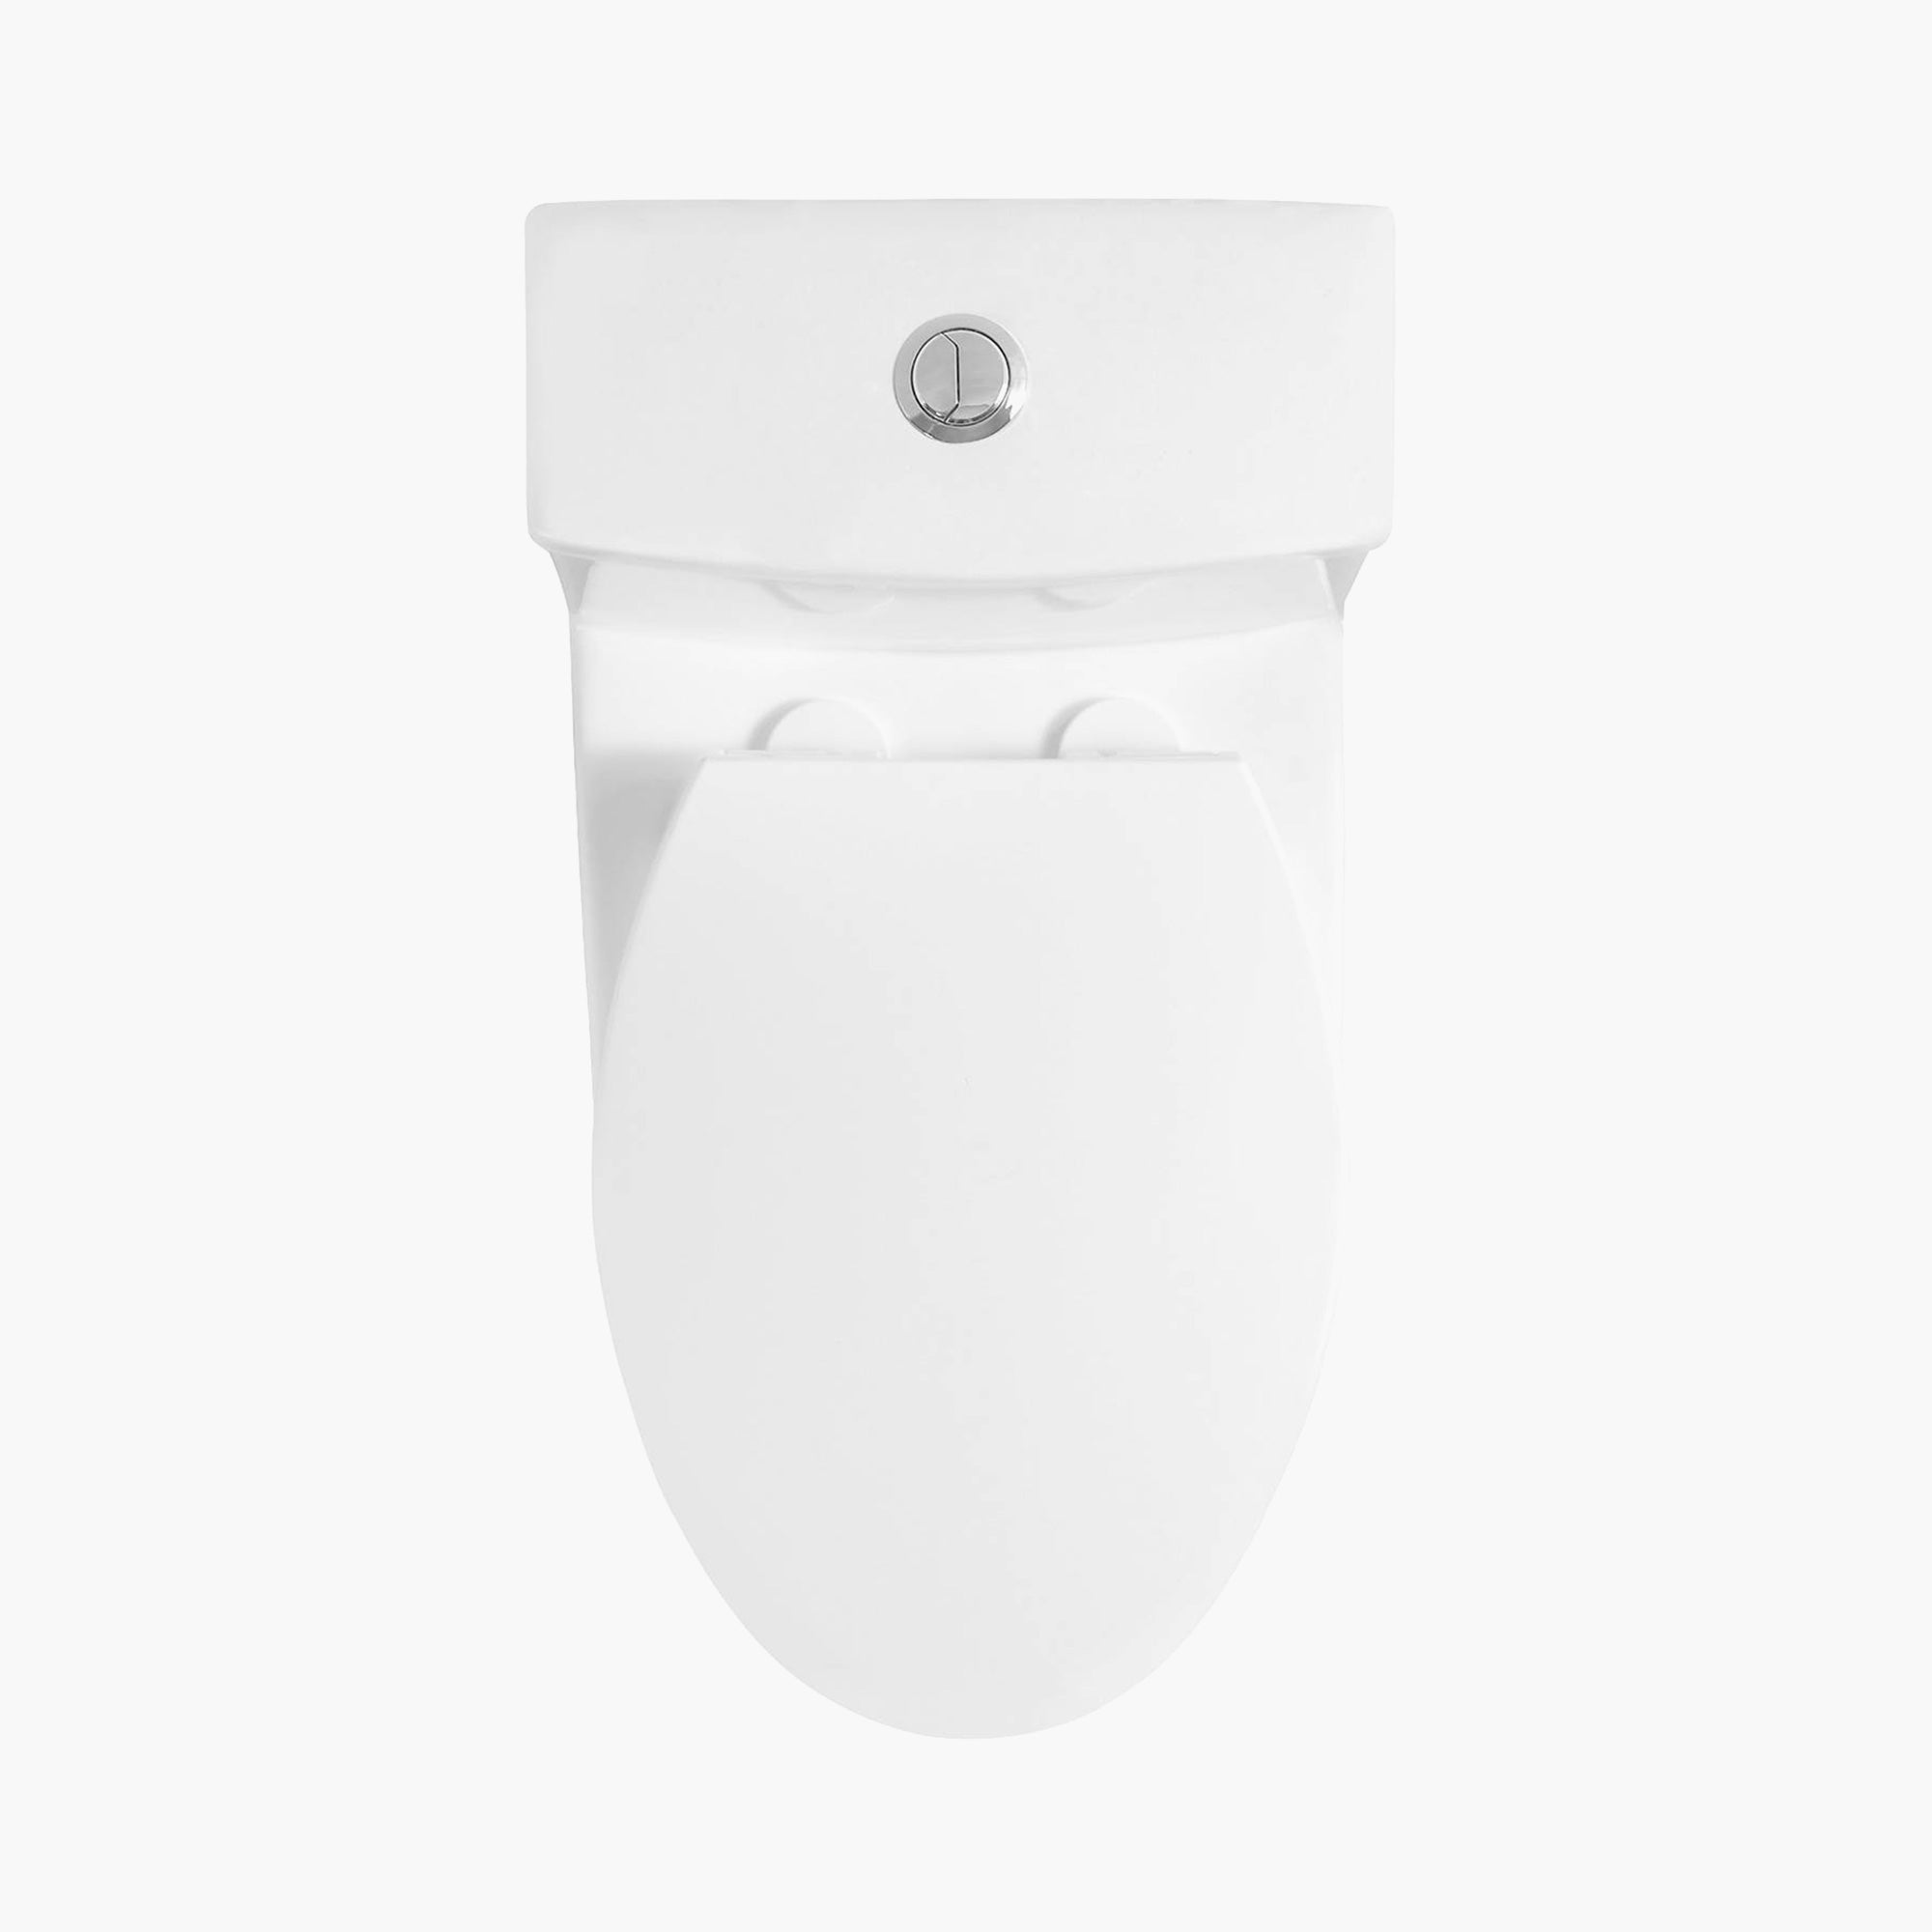 HOROW T0338W Elongated One Piece Toilet ADA Toilet Height 17.3 Inch